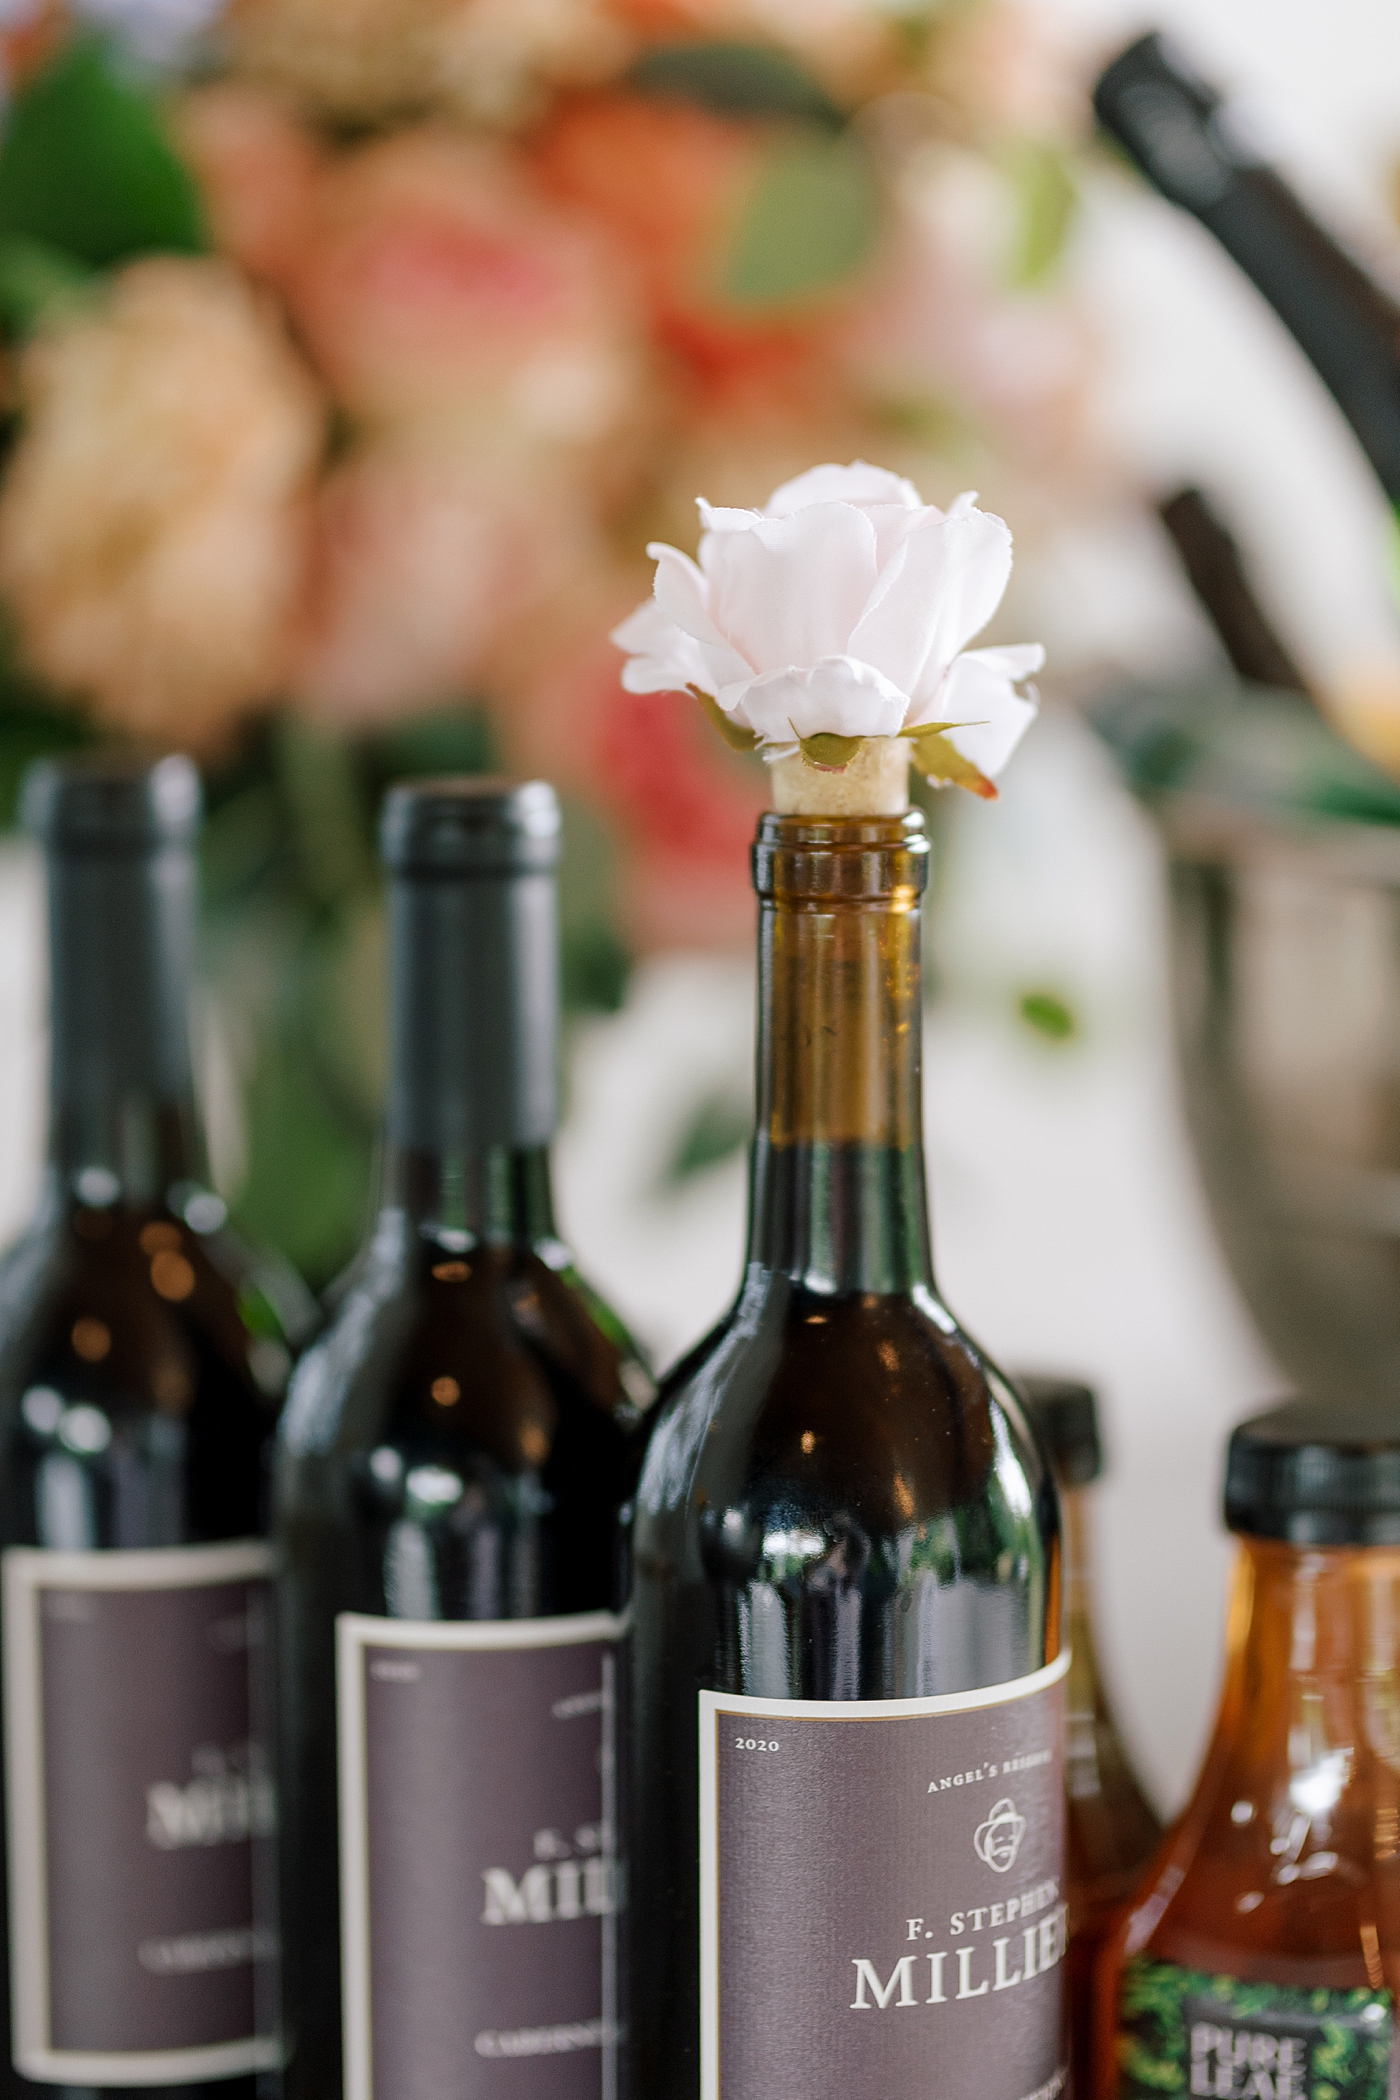 Bottles of wine during wedding reception | Image by Hope Helmuth Photography 